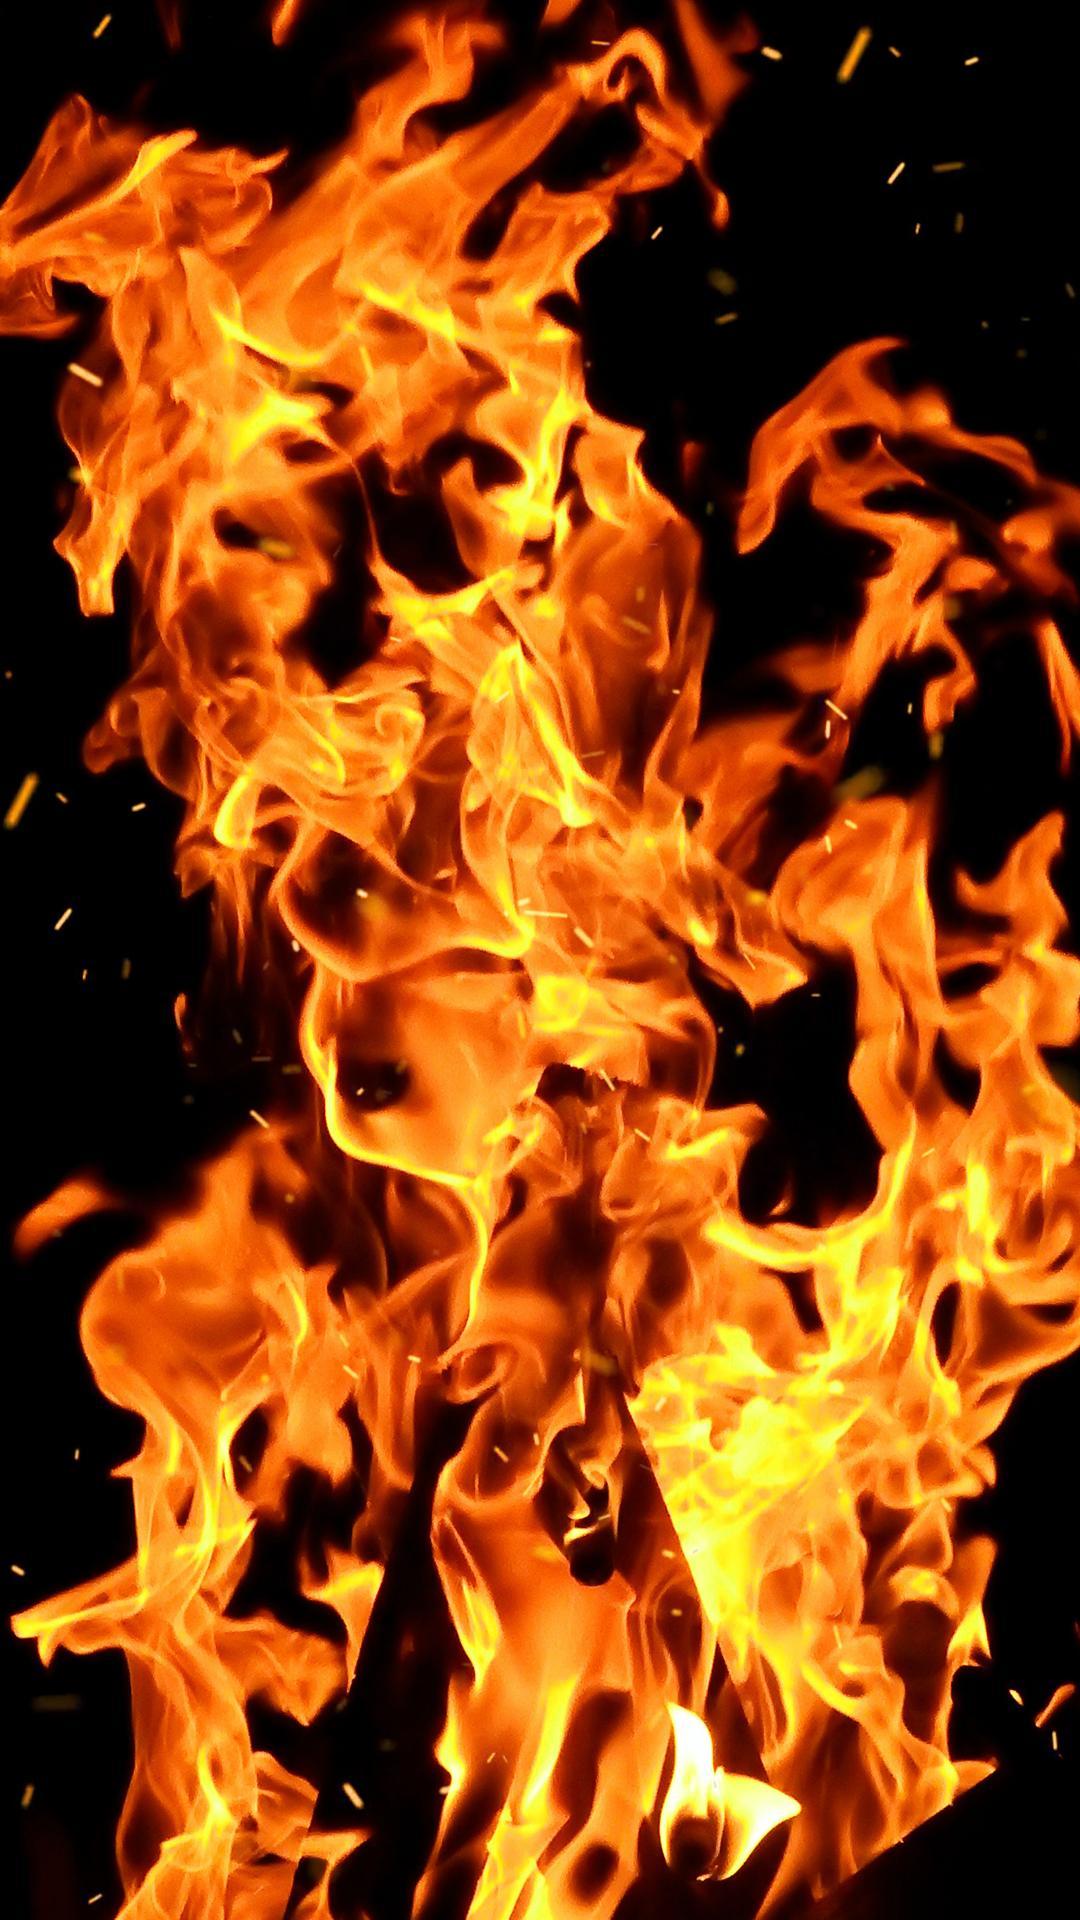 Burning flame Live Wallpaper for Android